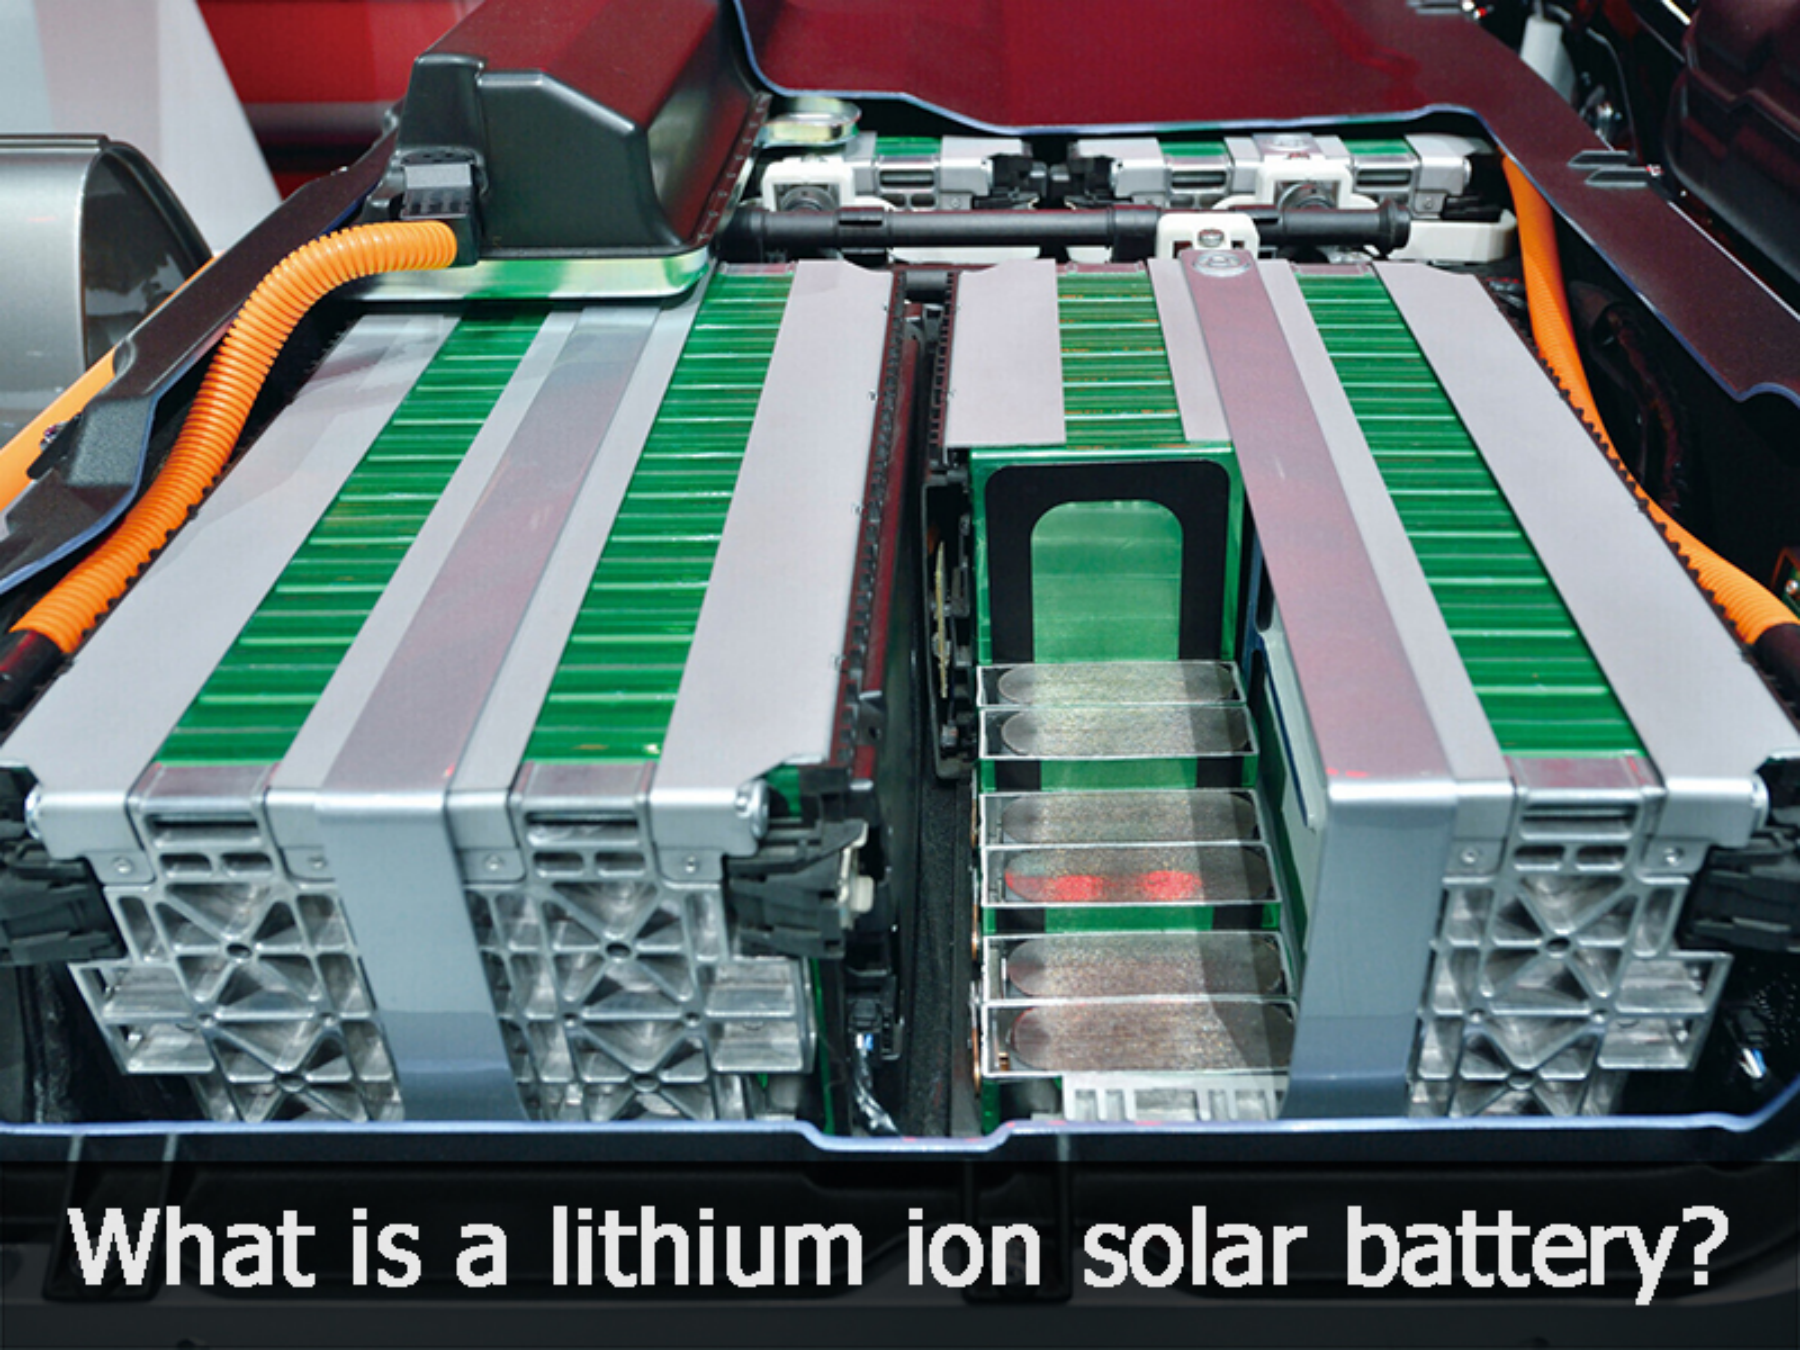 What is a lithium ion solar battery